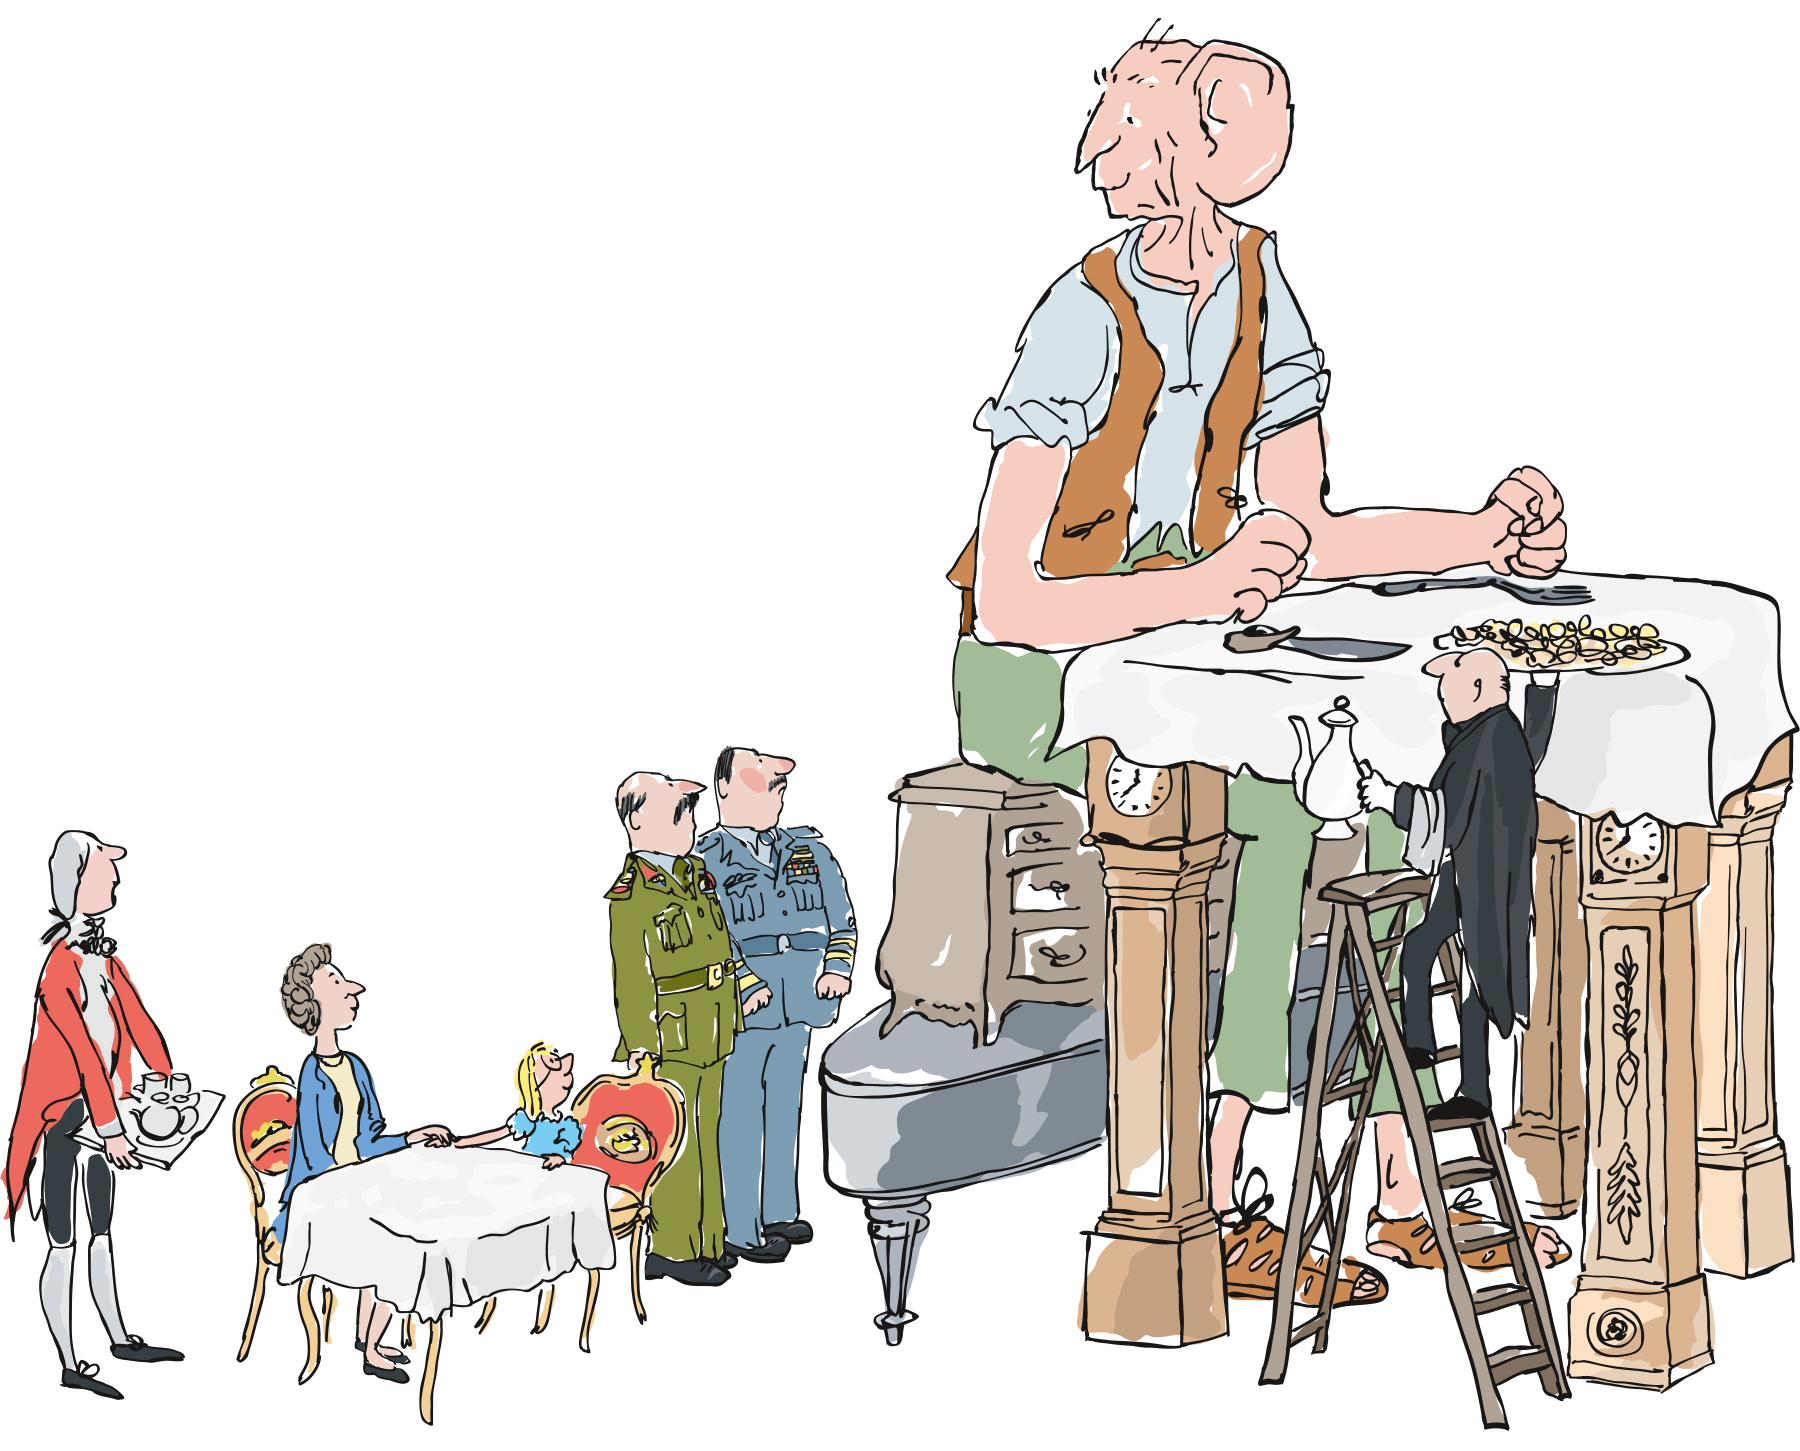 Illustration by Quentin Blake of The BFG having dinner with the Queen from Roald Dahl's classic book.